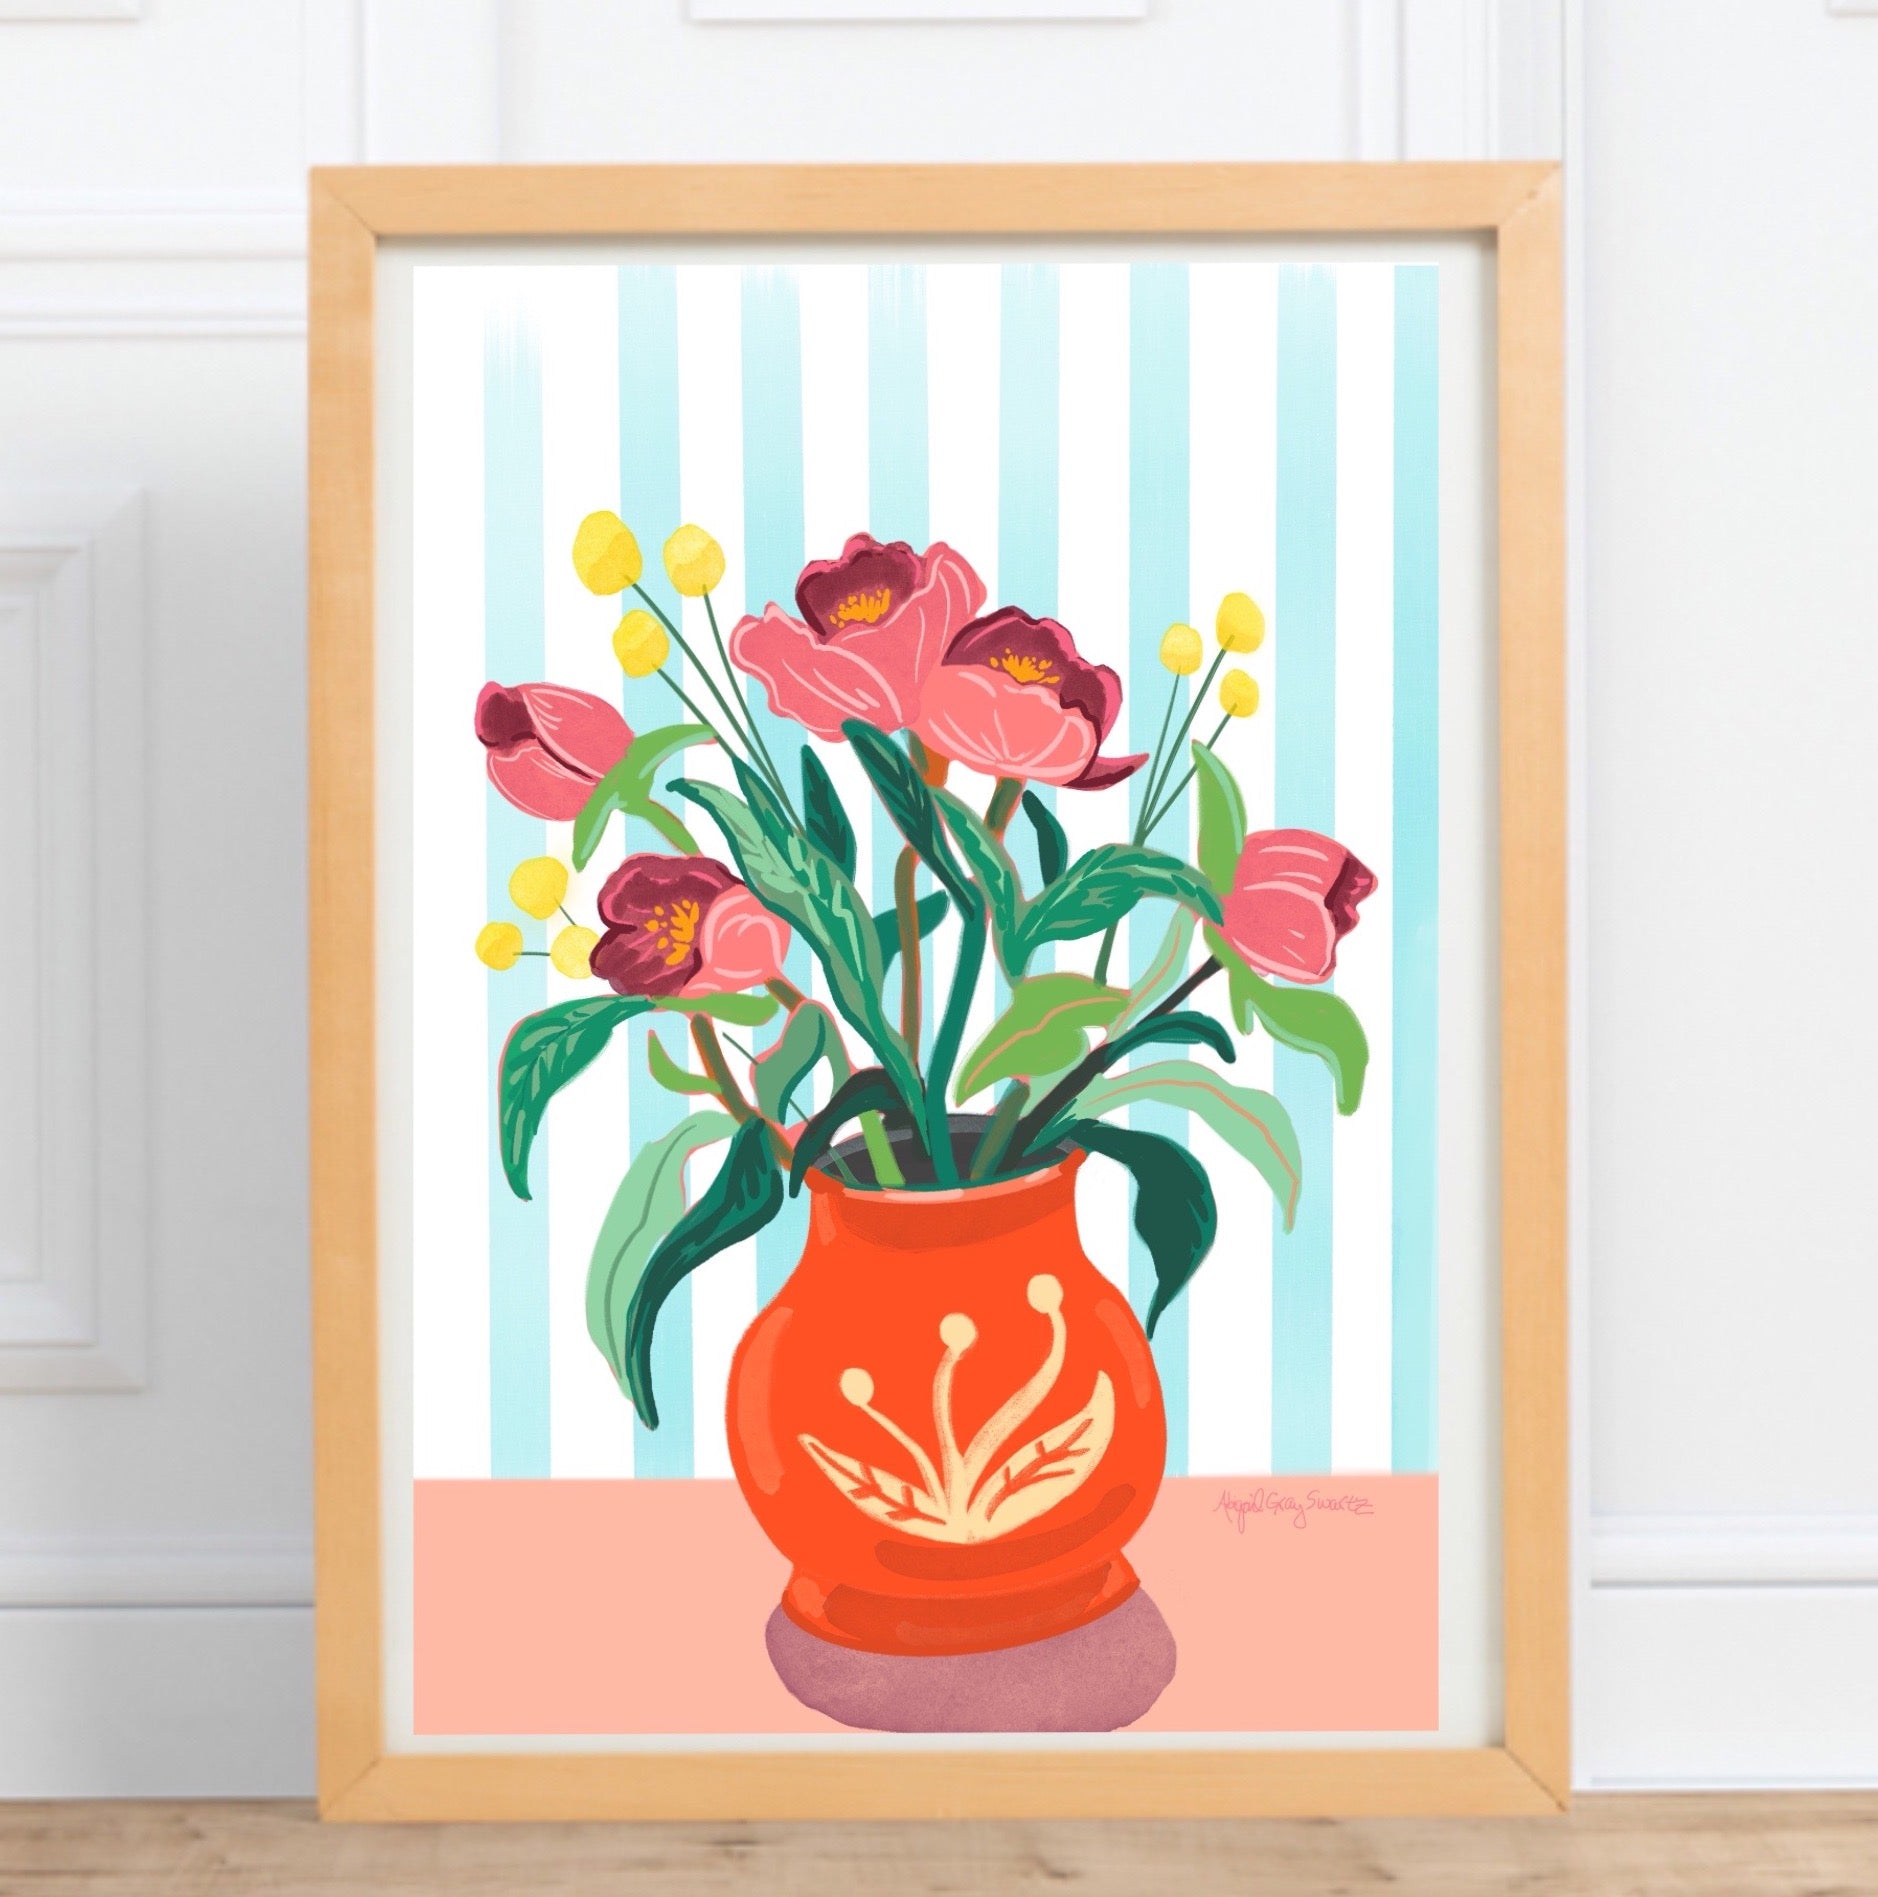 Print of a Bouquet of peonies in a red vase against blue and white striped wallpaper. Artwork made in Maine by Abigail Gray Swartz